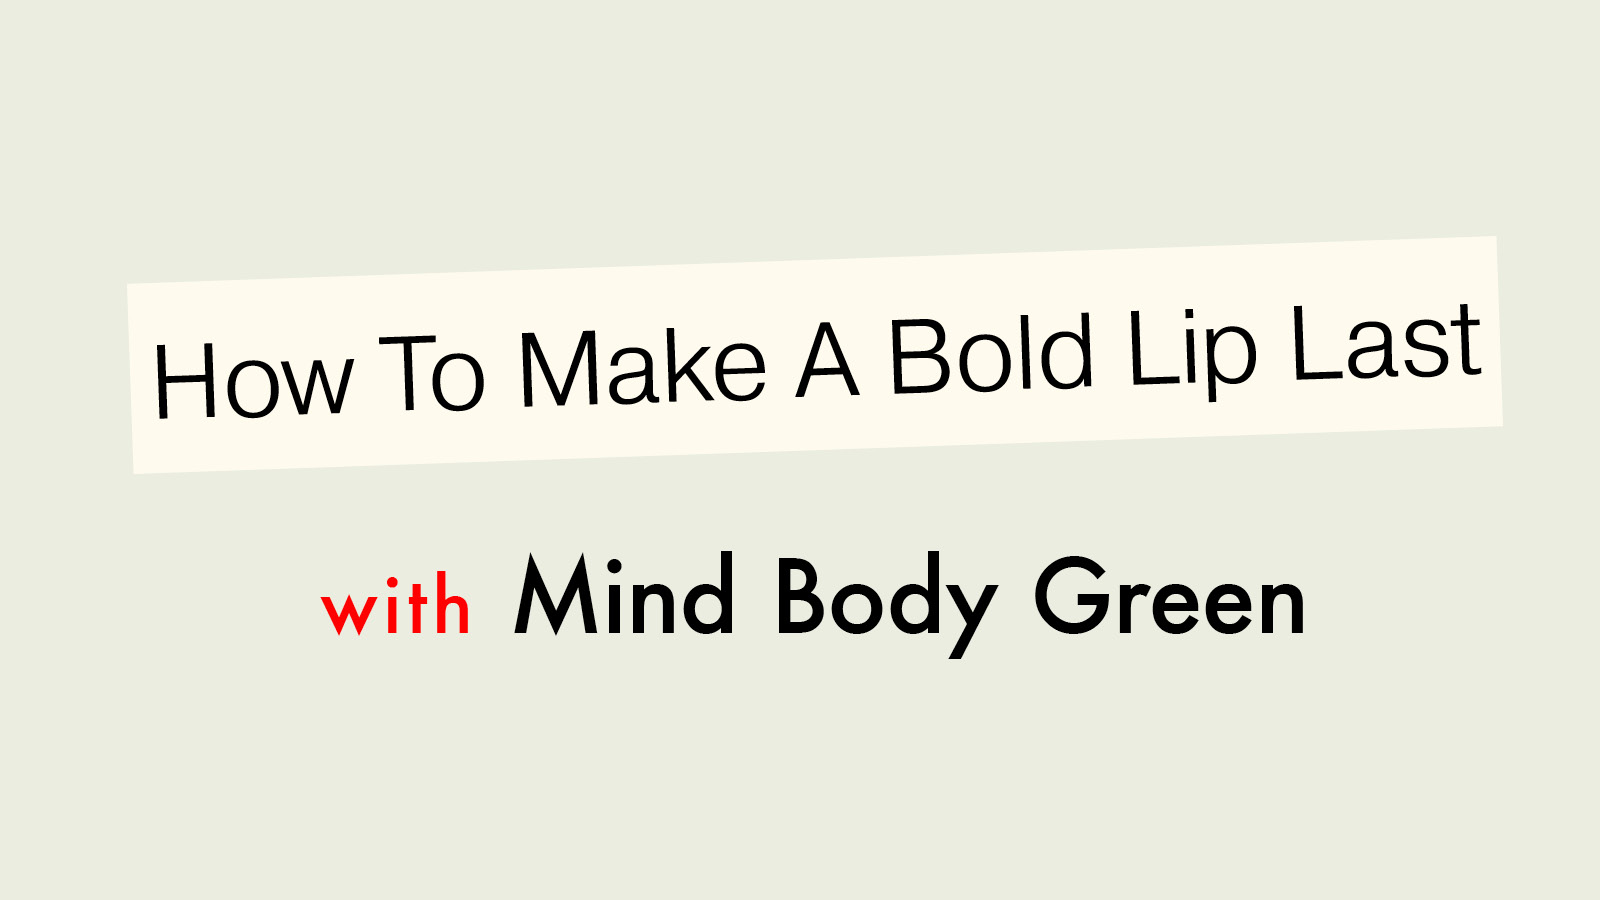 How To Make A Bold Lip Last — Even When You're Wearing Naturals